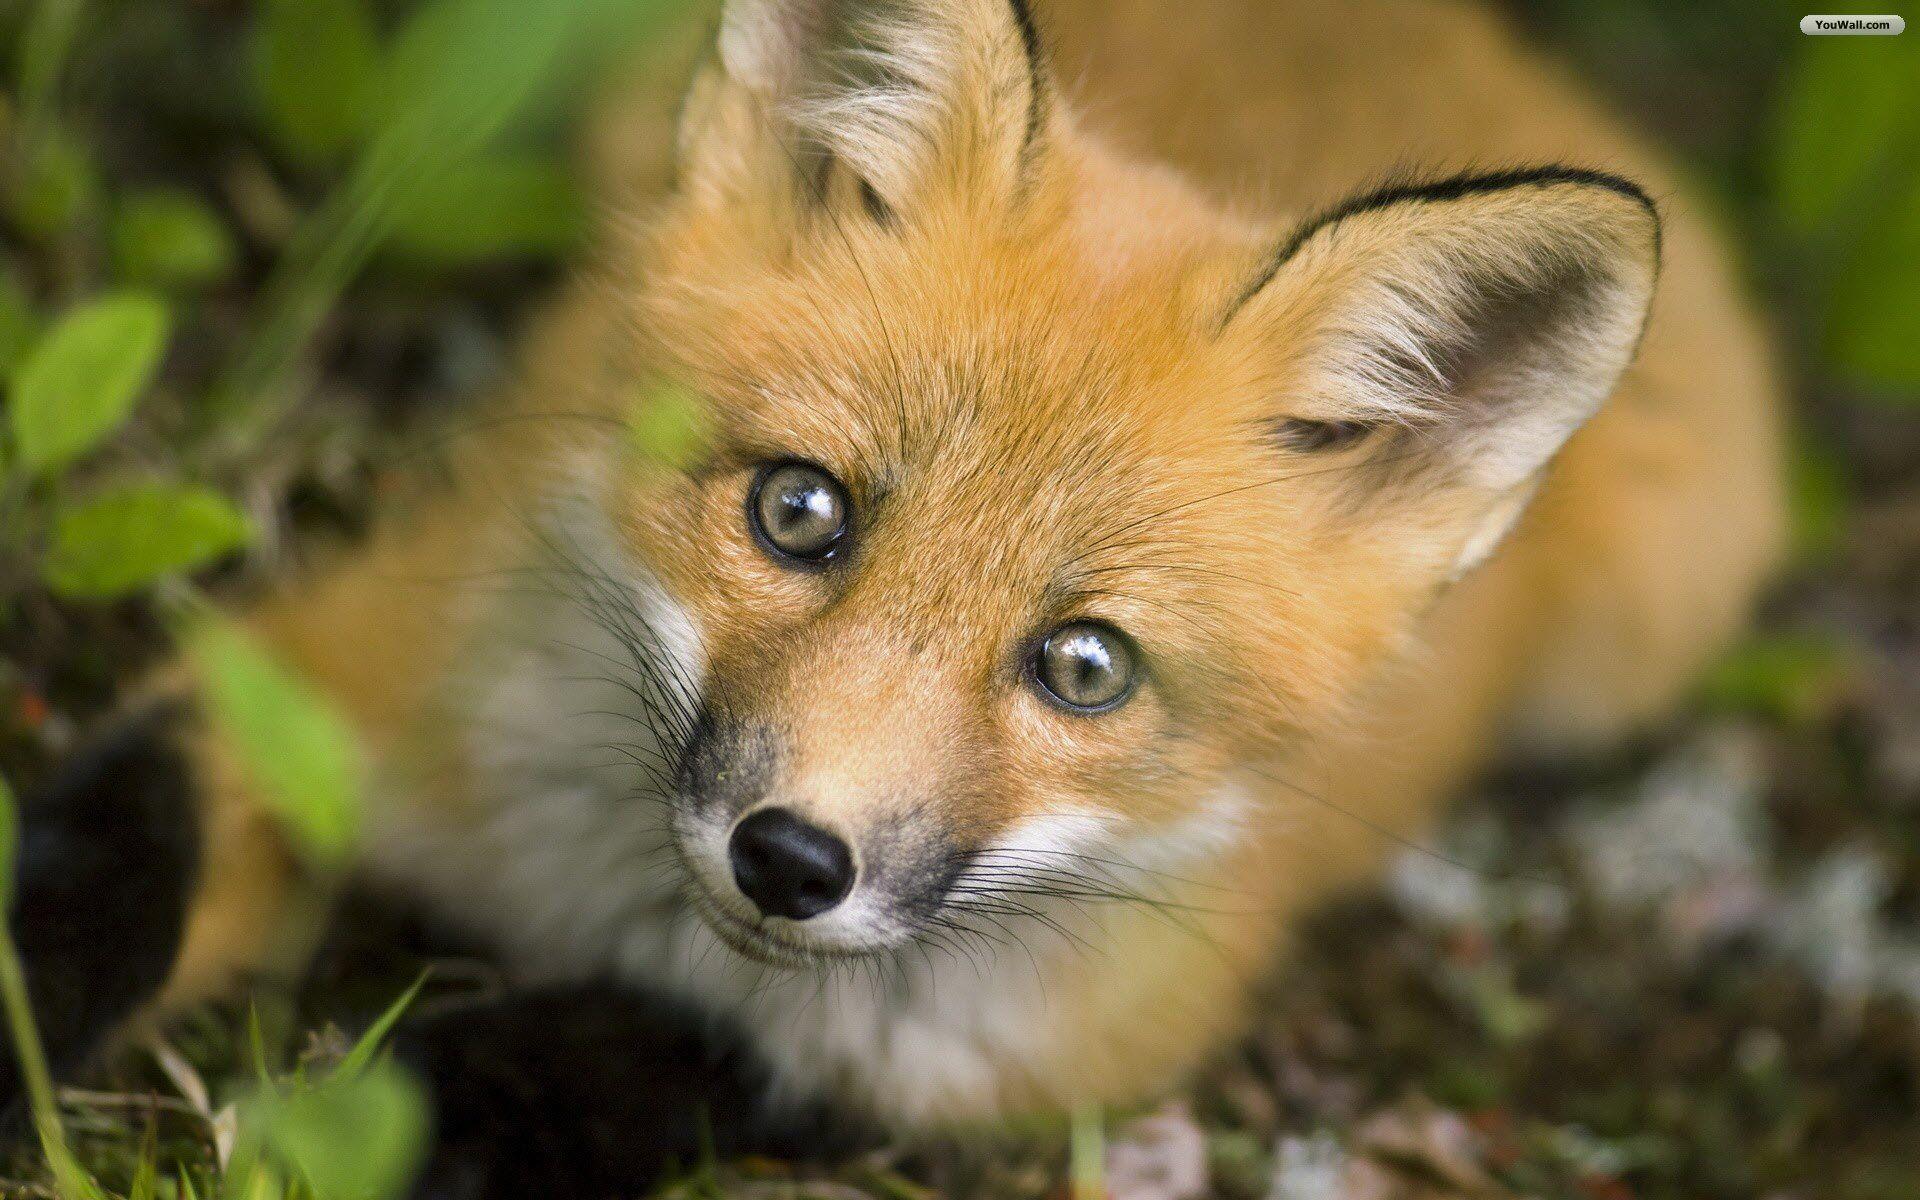 image about Foxes. Red fox, Eyes and Animals